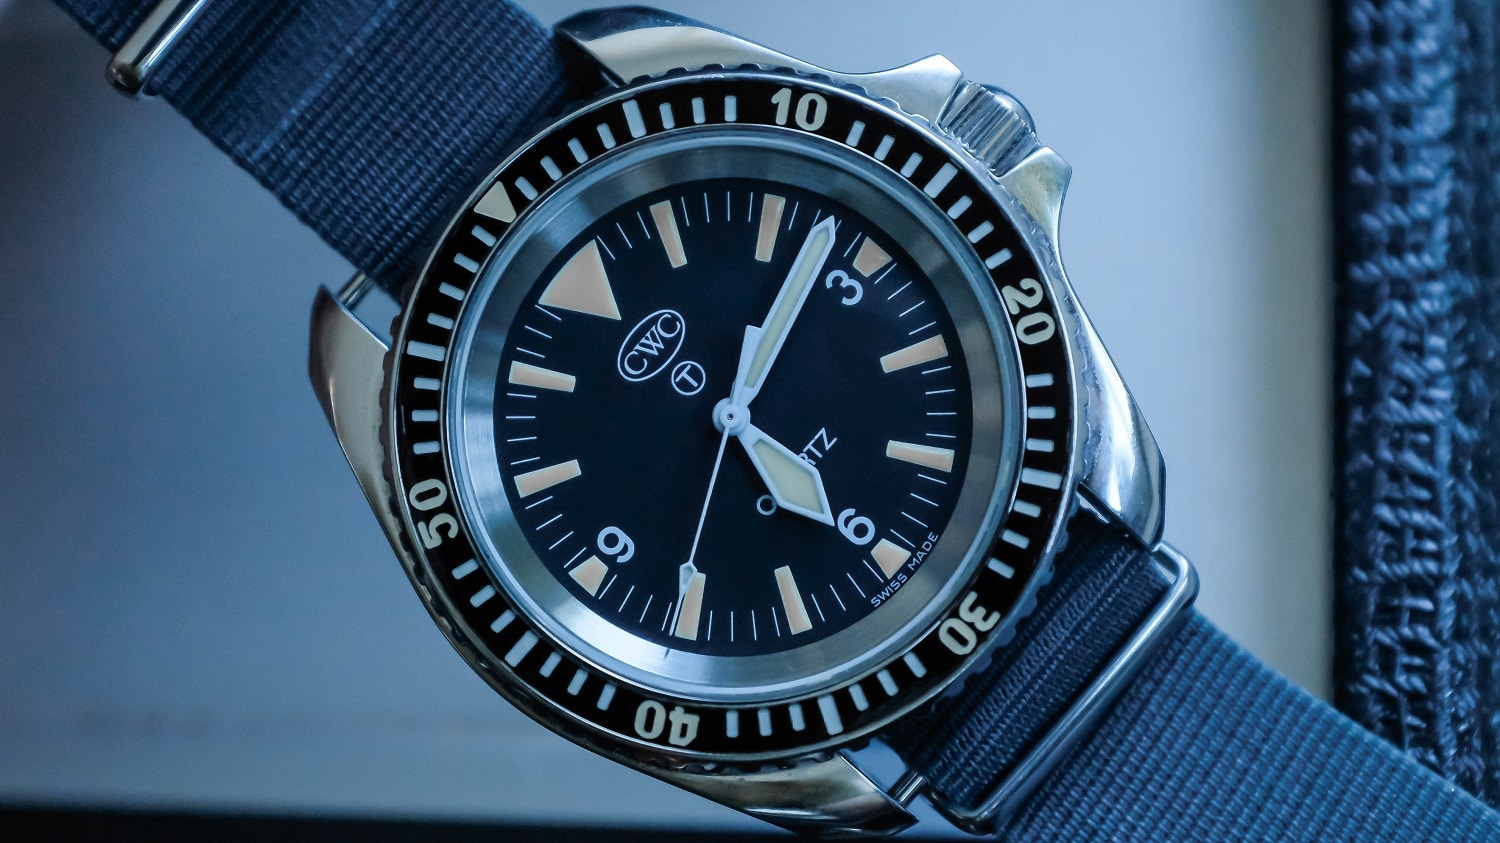 CWC 1983 Quartz Royal Navy Diver Review | Two Broke Watch Snobs